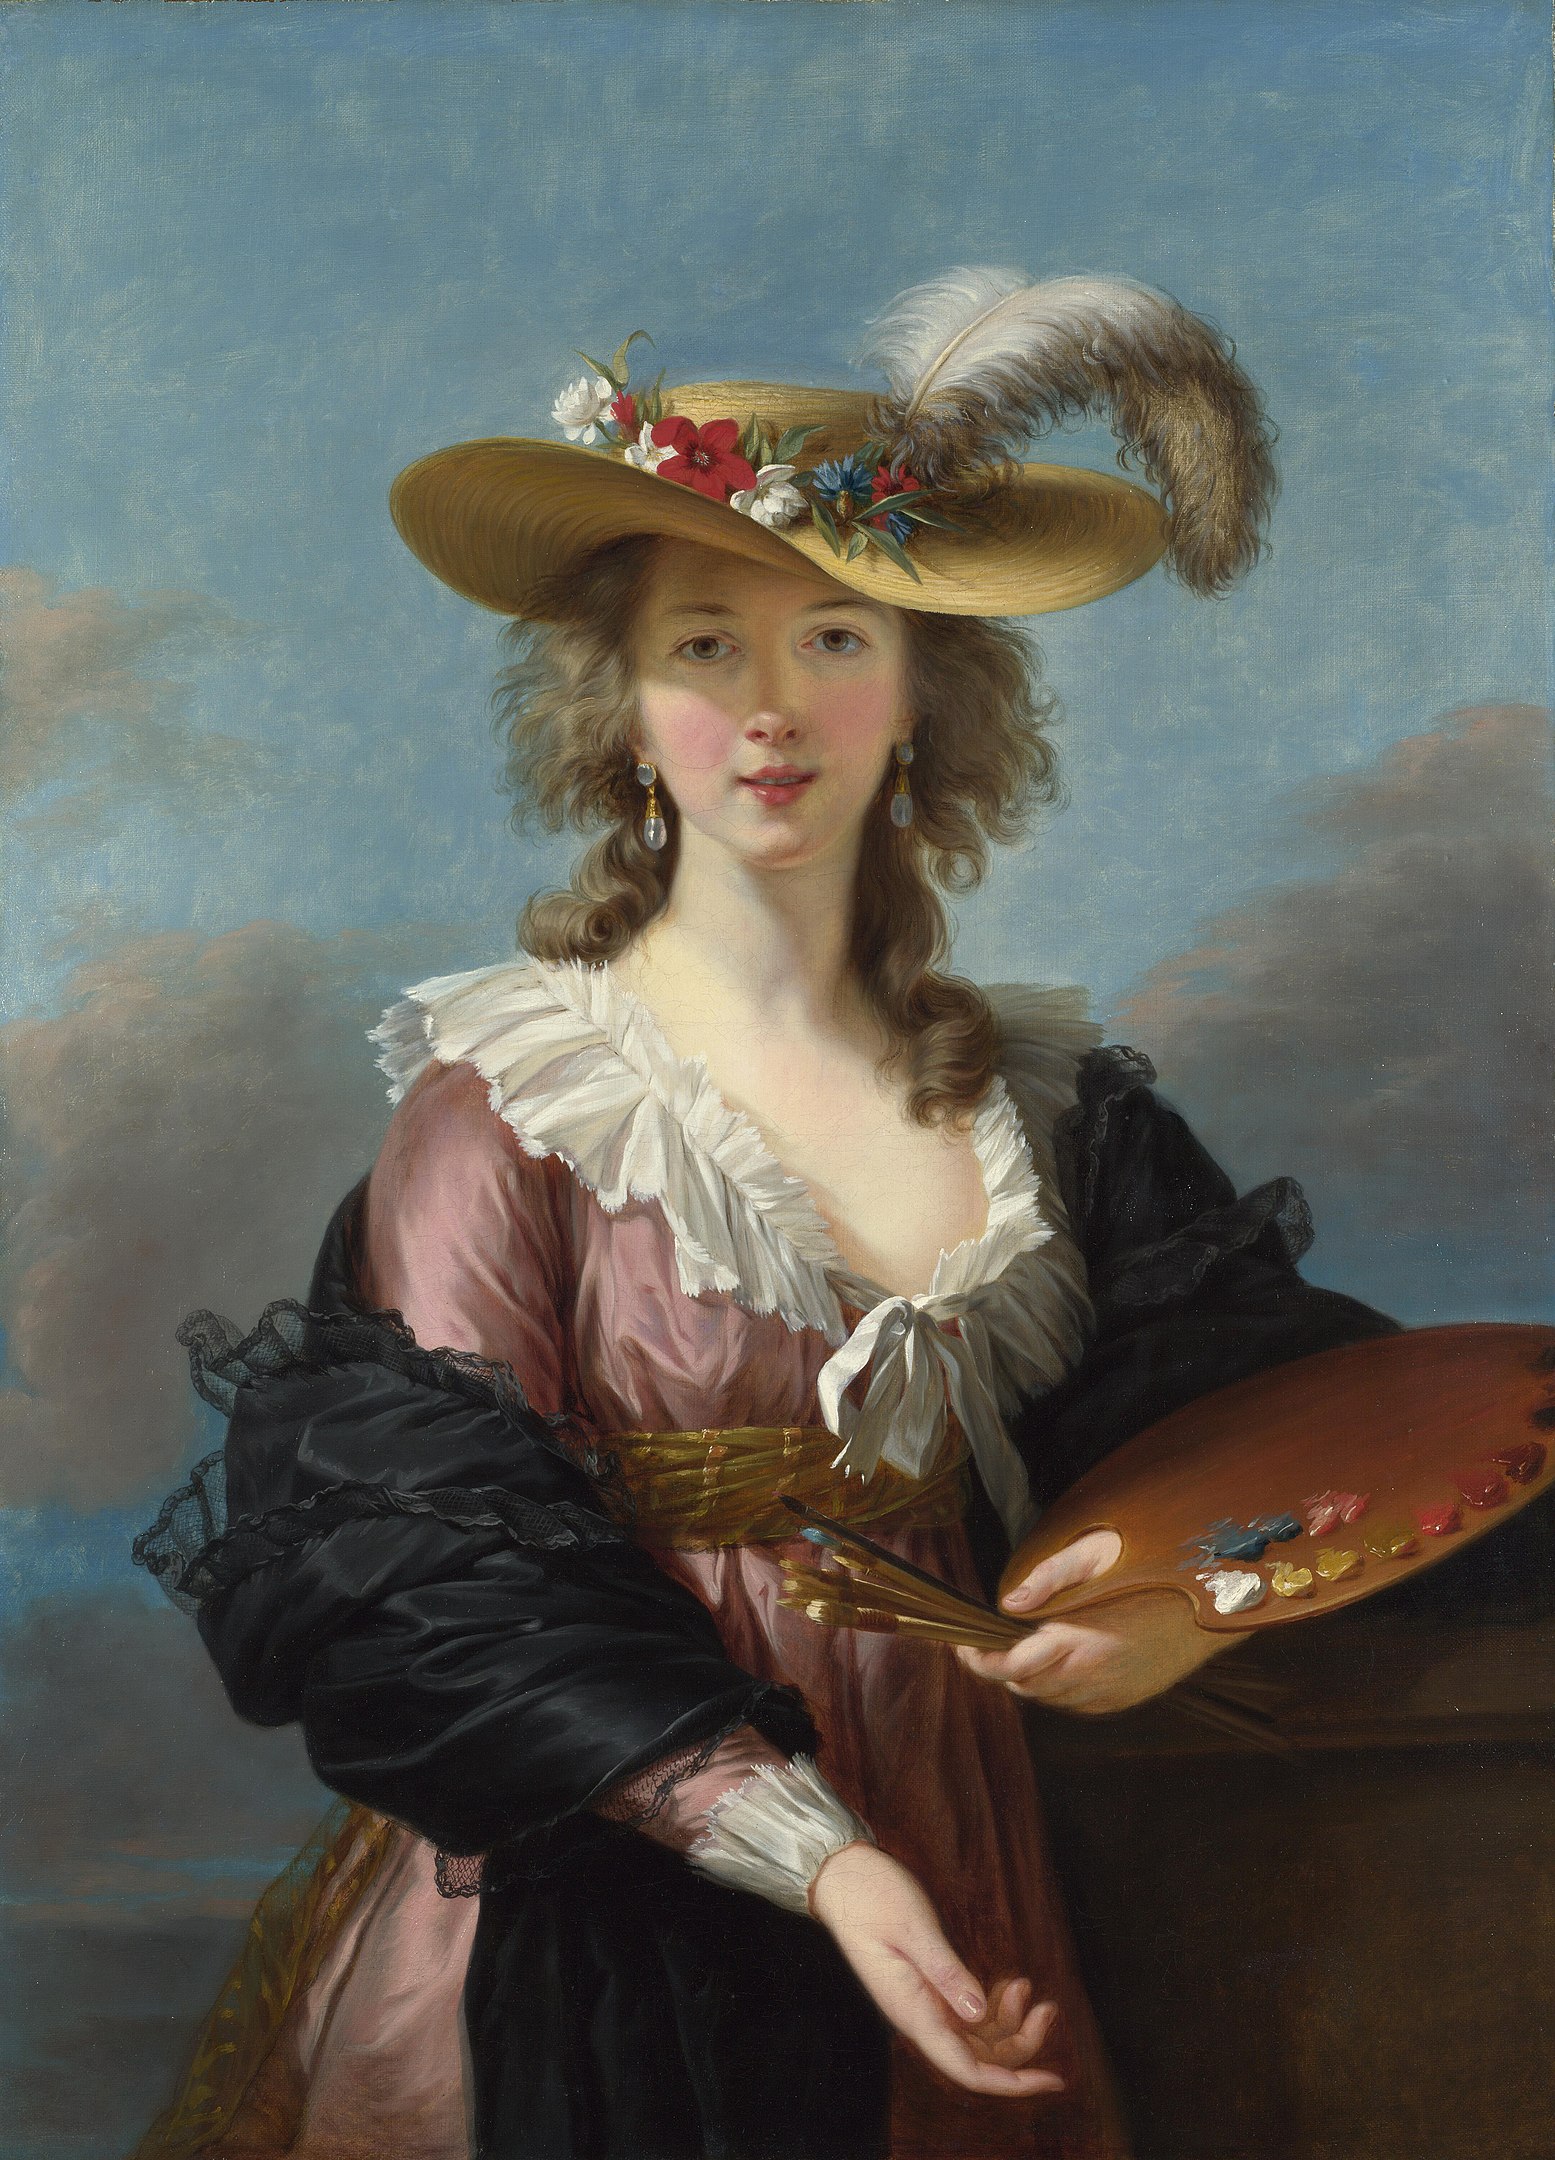 A portrait of a woman with paintbrushes and a palette in her hand looking back at the viewer